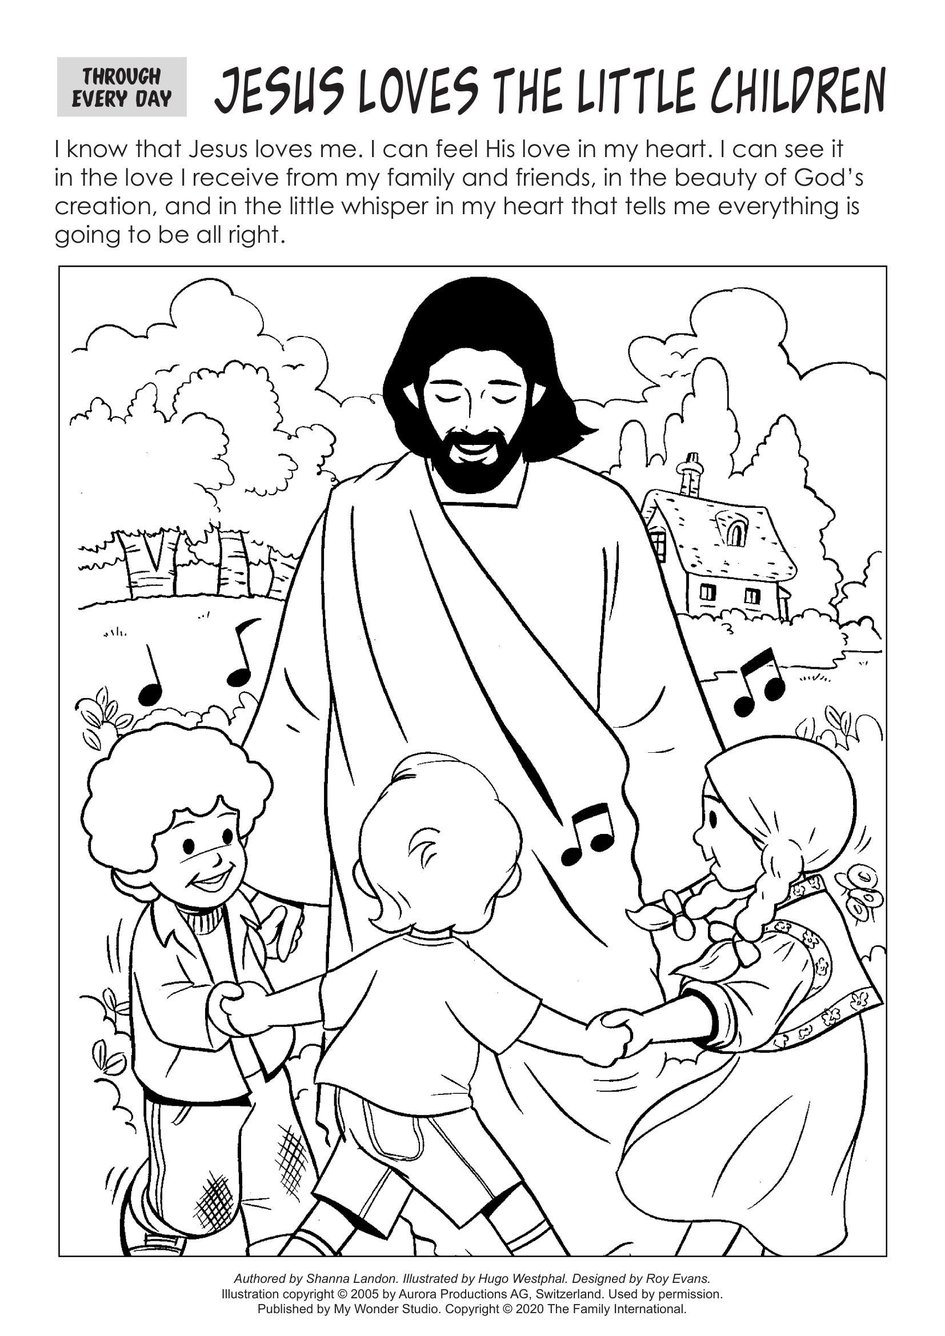 Coloring Page Through Every Day Jesus Loves the Little Children ...